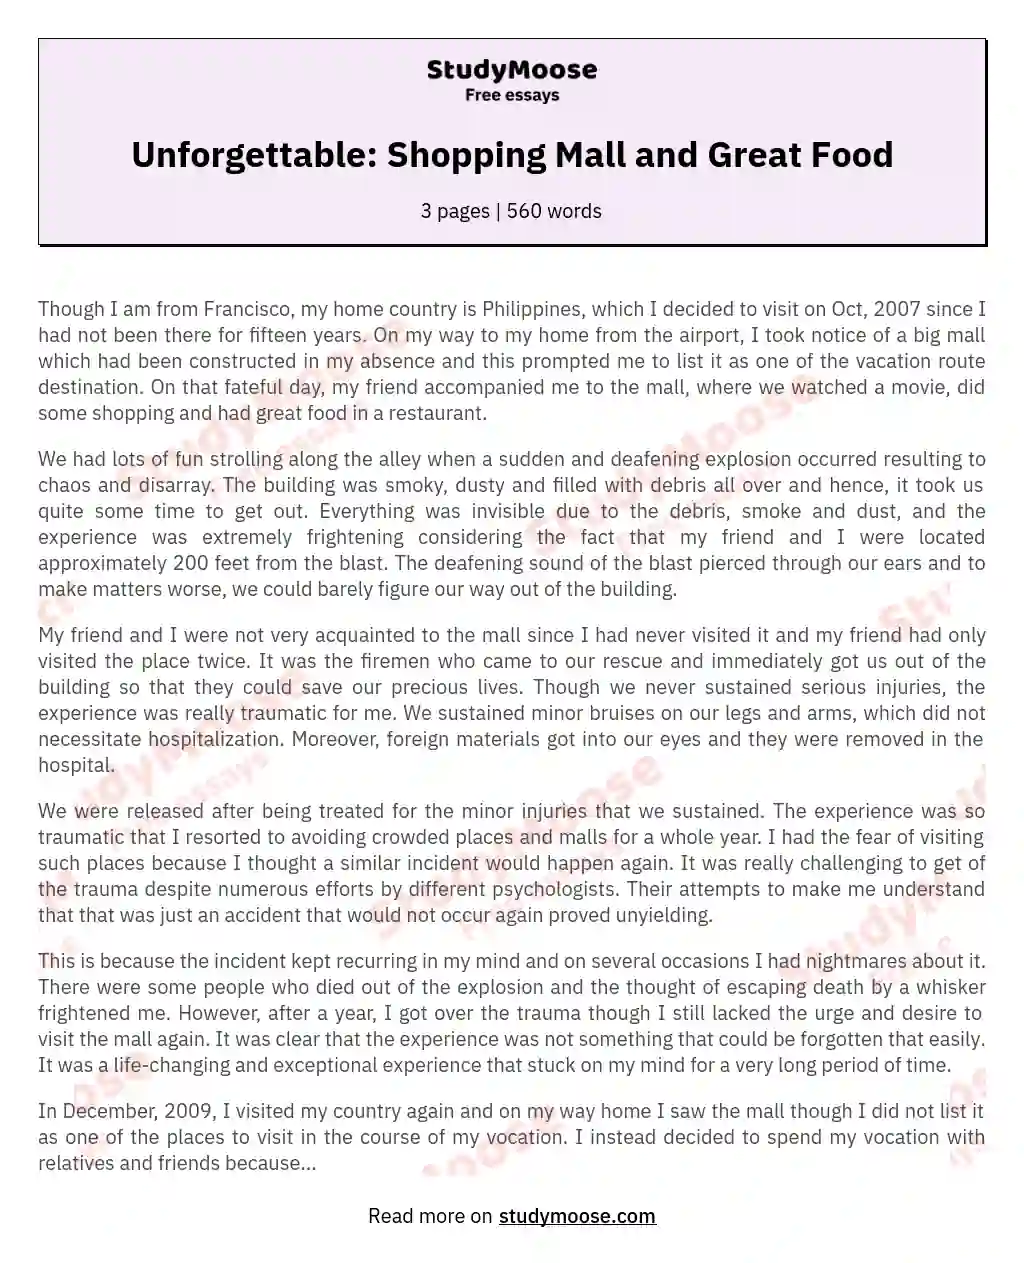 Unforgettable: Shopping Mall and Great Food